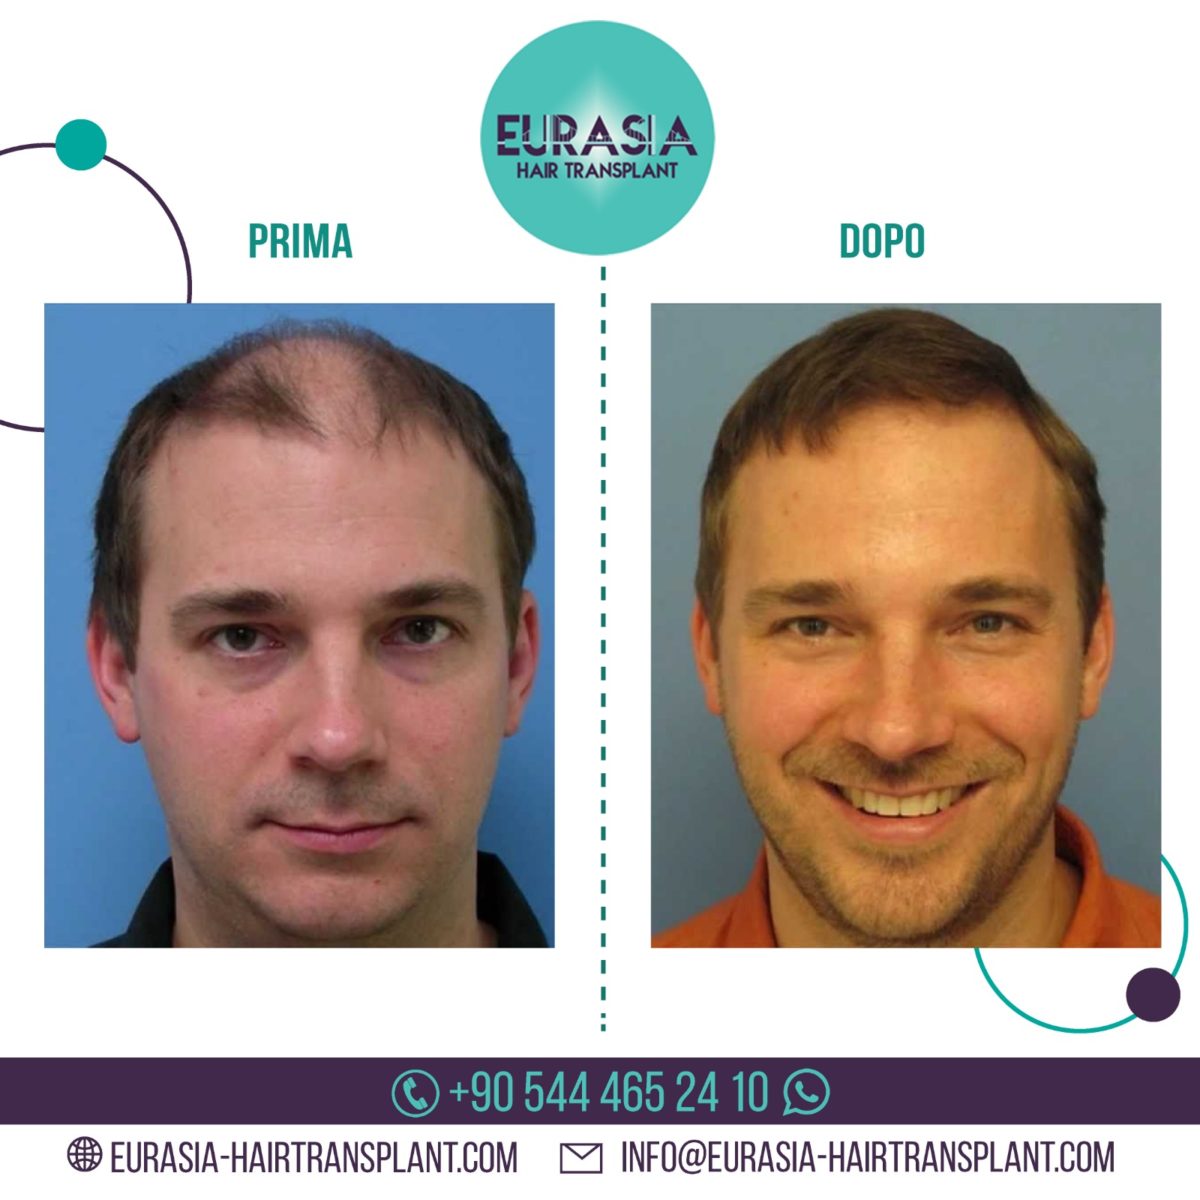 Videos and photos about hair transplant, before and after photos